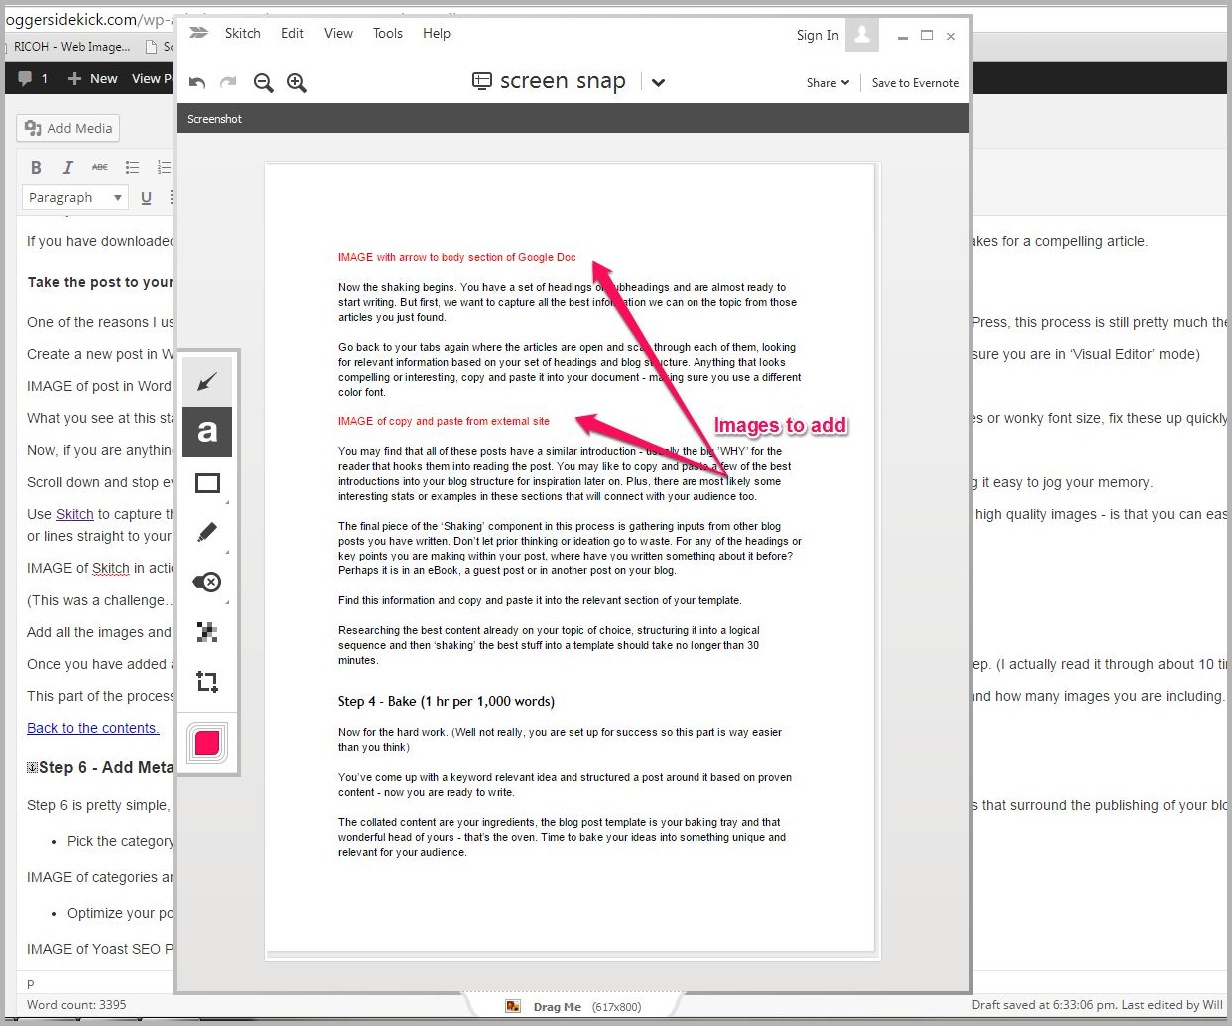 Skitch image editor for the writing process